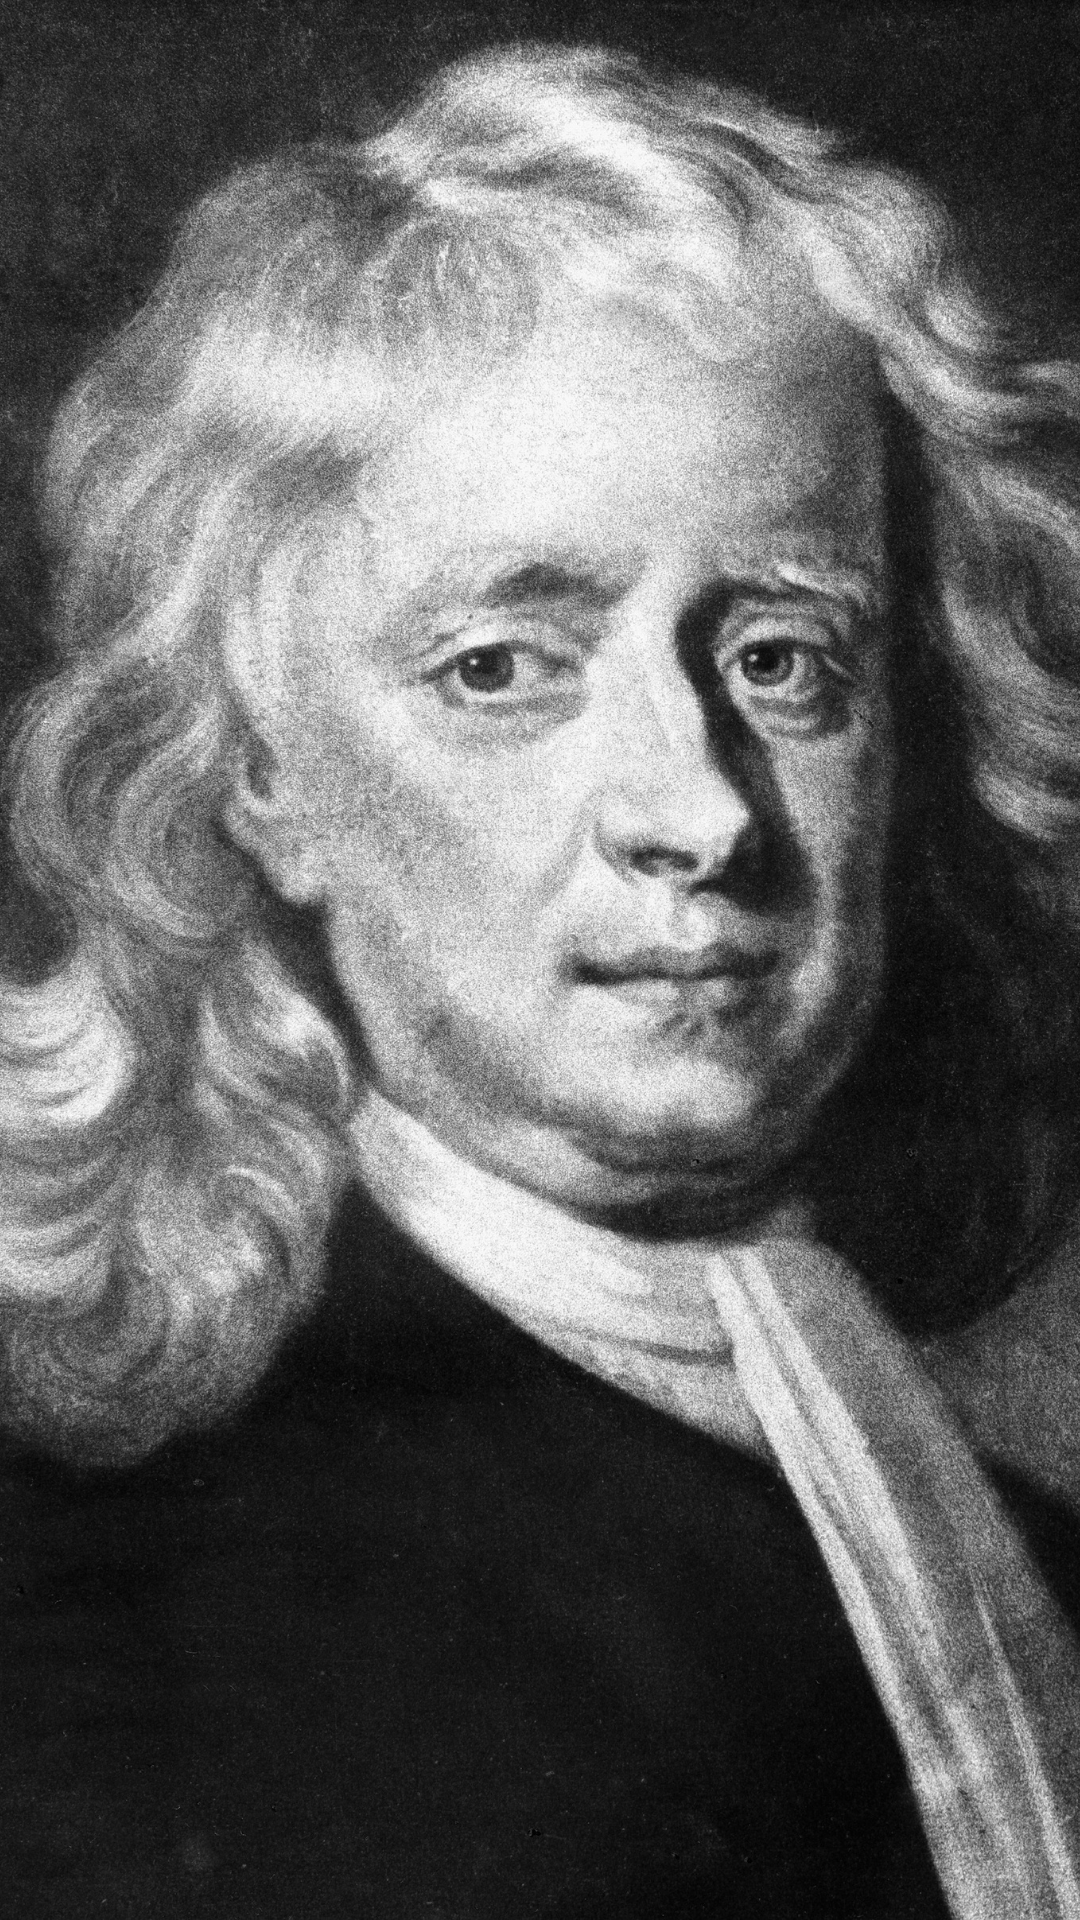 What makes Isaac Newton one of the Most Influential in Scientific